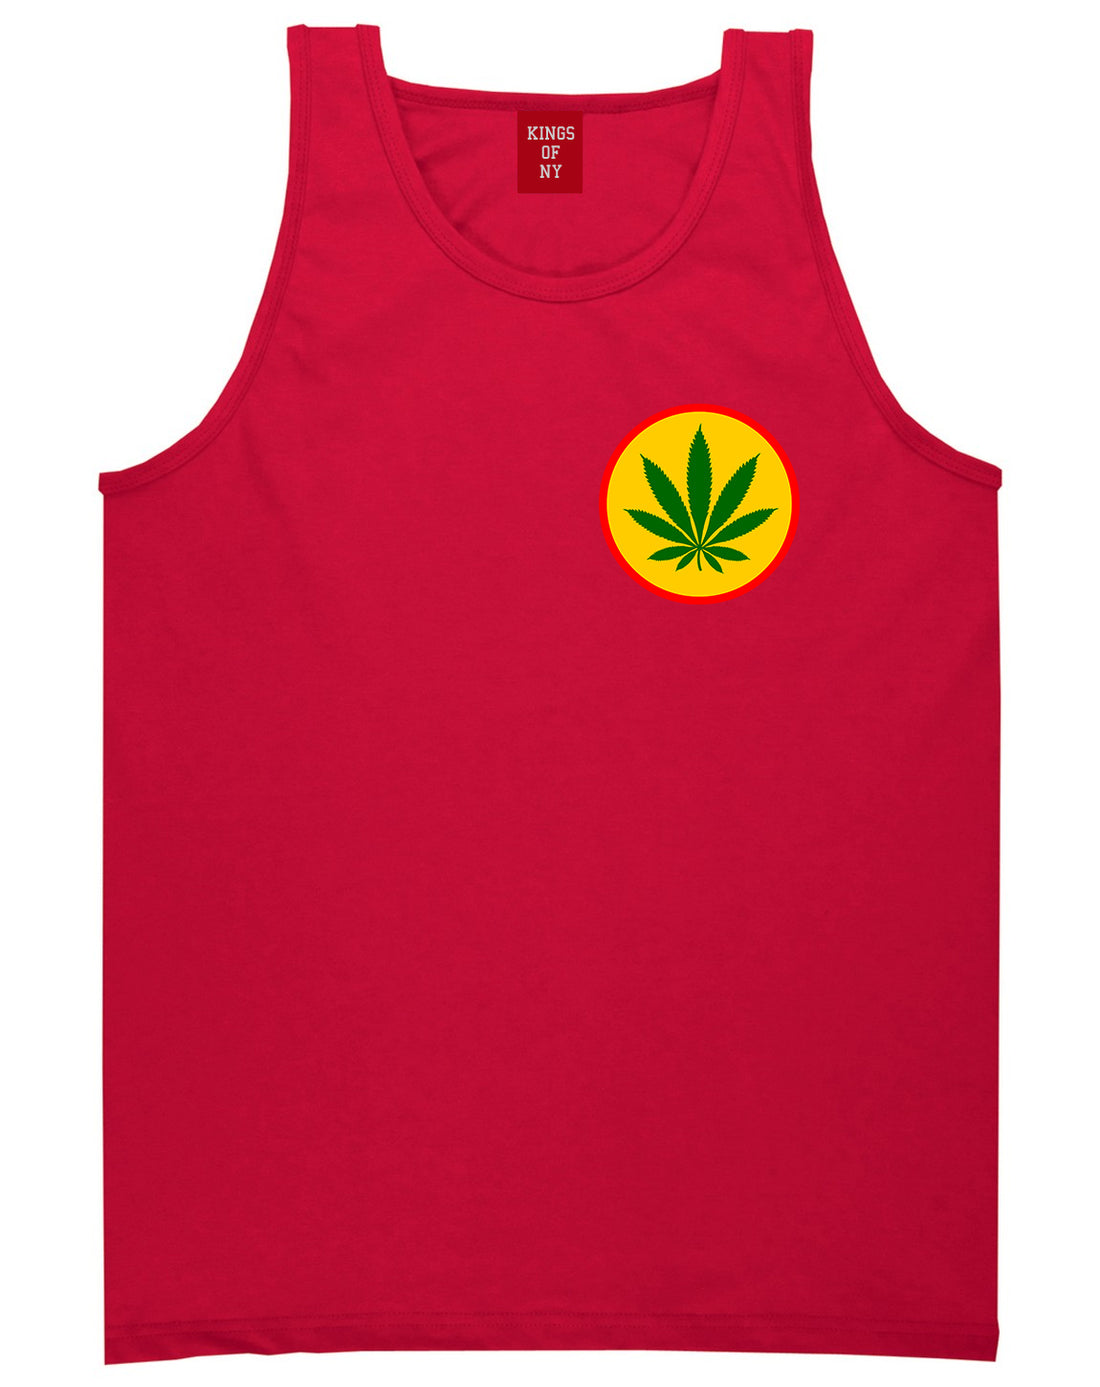 Ganja Green Weed Leaf Chest Mens Red Tank Top Shirt by KINGS OF NY